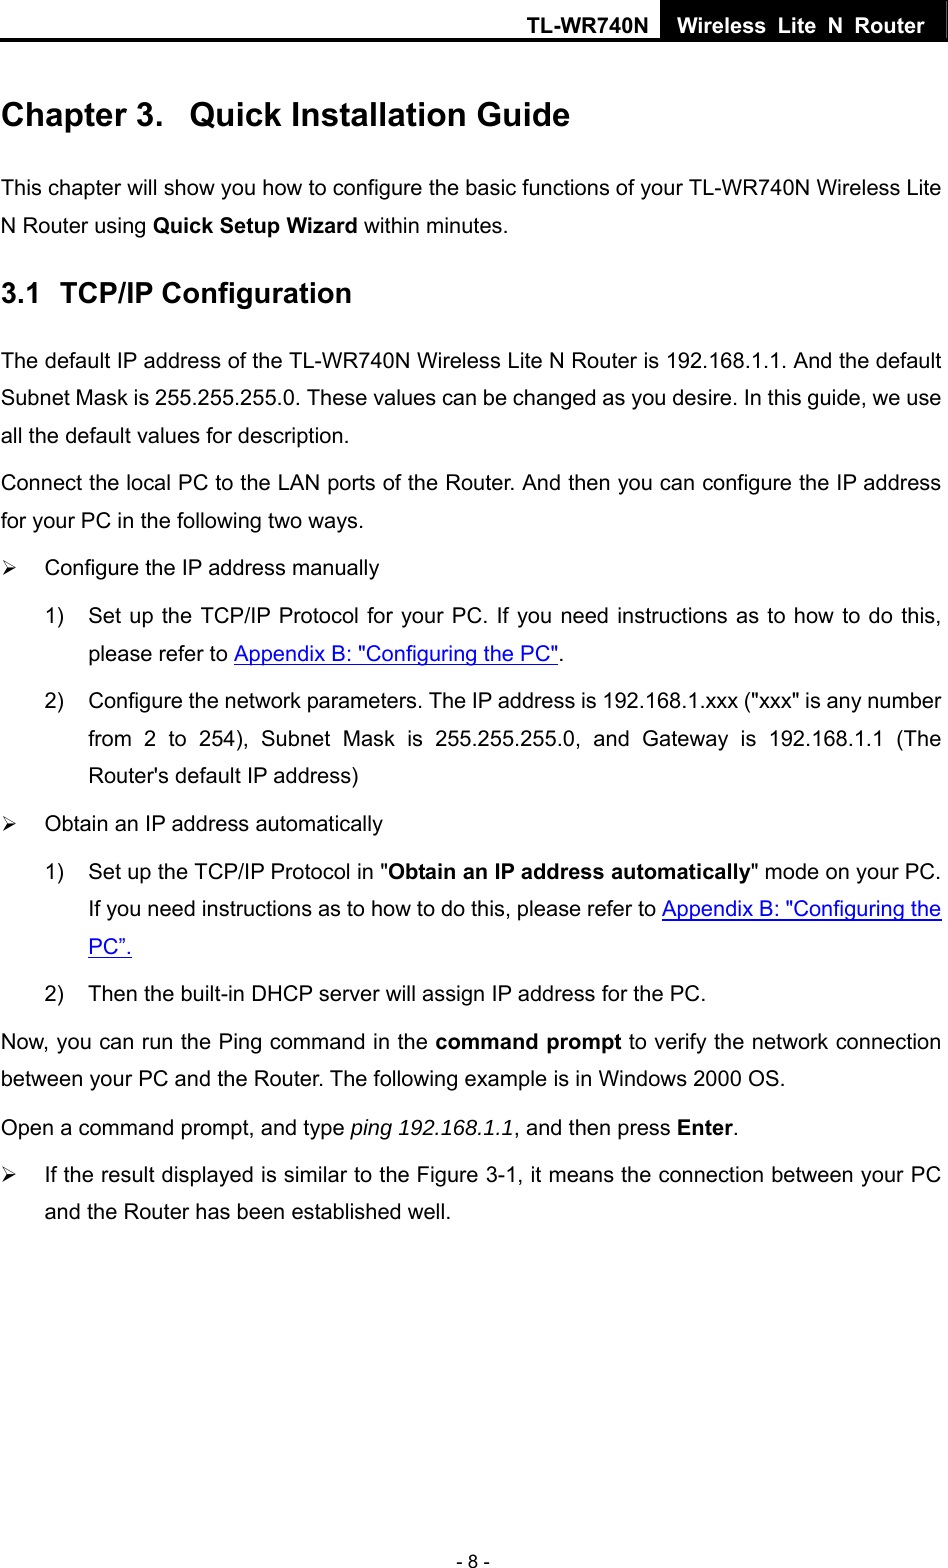 TL-WR740N Wireless Lite N Router  - 8 - Chapter 3.  Quick Installation Guide This chapter will show you how to configure the basic functions of your TL-WR740N Wireless Lite N Router using Quick Setup Wizard within minutes. 3.1  TCP/IP Configuration The default IP address of the TL-WR740N Wireless Lite N Router is 192.168.1.1. And the default Subnet Mask is 255.255.255.0. These values can be changed as you desire. In this guide, we use all the default values for description. Connect the local PC to the LAN ports of the Router. And then you can configure the IP address for your PC in the following two ways. ¾ Configure the IP address manually 1)  Set up the TCP/IP Protocol for your PC. If you need instructions as to how to do this, please refer to Appendix B: &quot;Configuring the PC&quot;. 2)  Configure the network parameters. The IP address is 192.168.1.xxx (&quot;xxx&quot; is any number from 2 to 254), Subnet Mask is 255.255.255.0, and Gateway is 192.168.1.1 (The Router&apos;s default IP address) ¾ Obtain an IP address automatically 1)  Set up the TCP/IP Protocol in &quot;Obtain an IP address automatically&quot; mode on your PC. If you need instructions as to how to do this, please refer to Appendix B: &quot;Configuring the PC”. 2)  Then the built-in DHCP server will assign IP address for the PC. Now, you can run the Ping command in the command prompt to verify the network connection between your PC and the Router. The following example is in Windows 2000 OS. Open a command prompt, and type ping 192.168.1.1, and then press Enter. ¾  If the result displayed is similar to the Figure 3-1, it means the connection between your PC and the Router has been established well.   